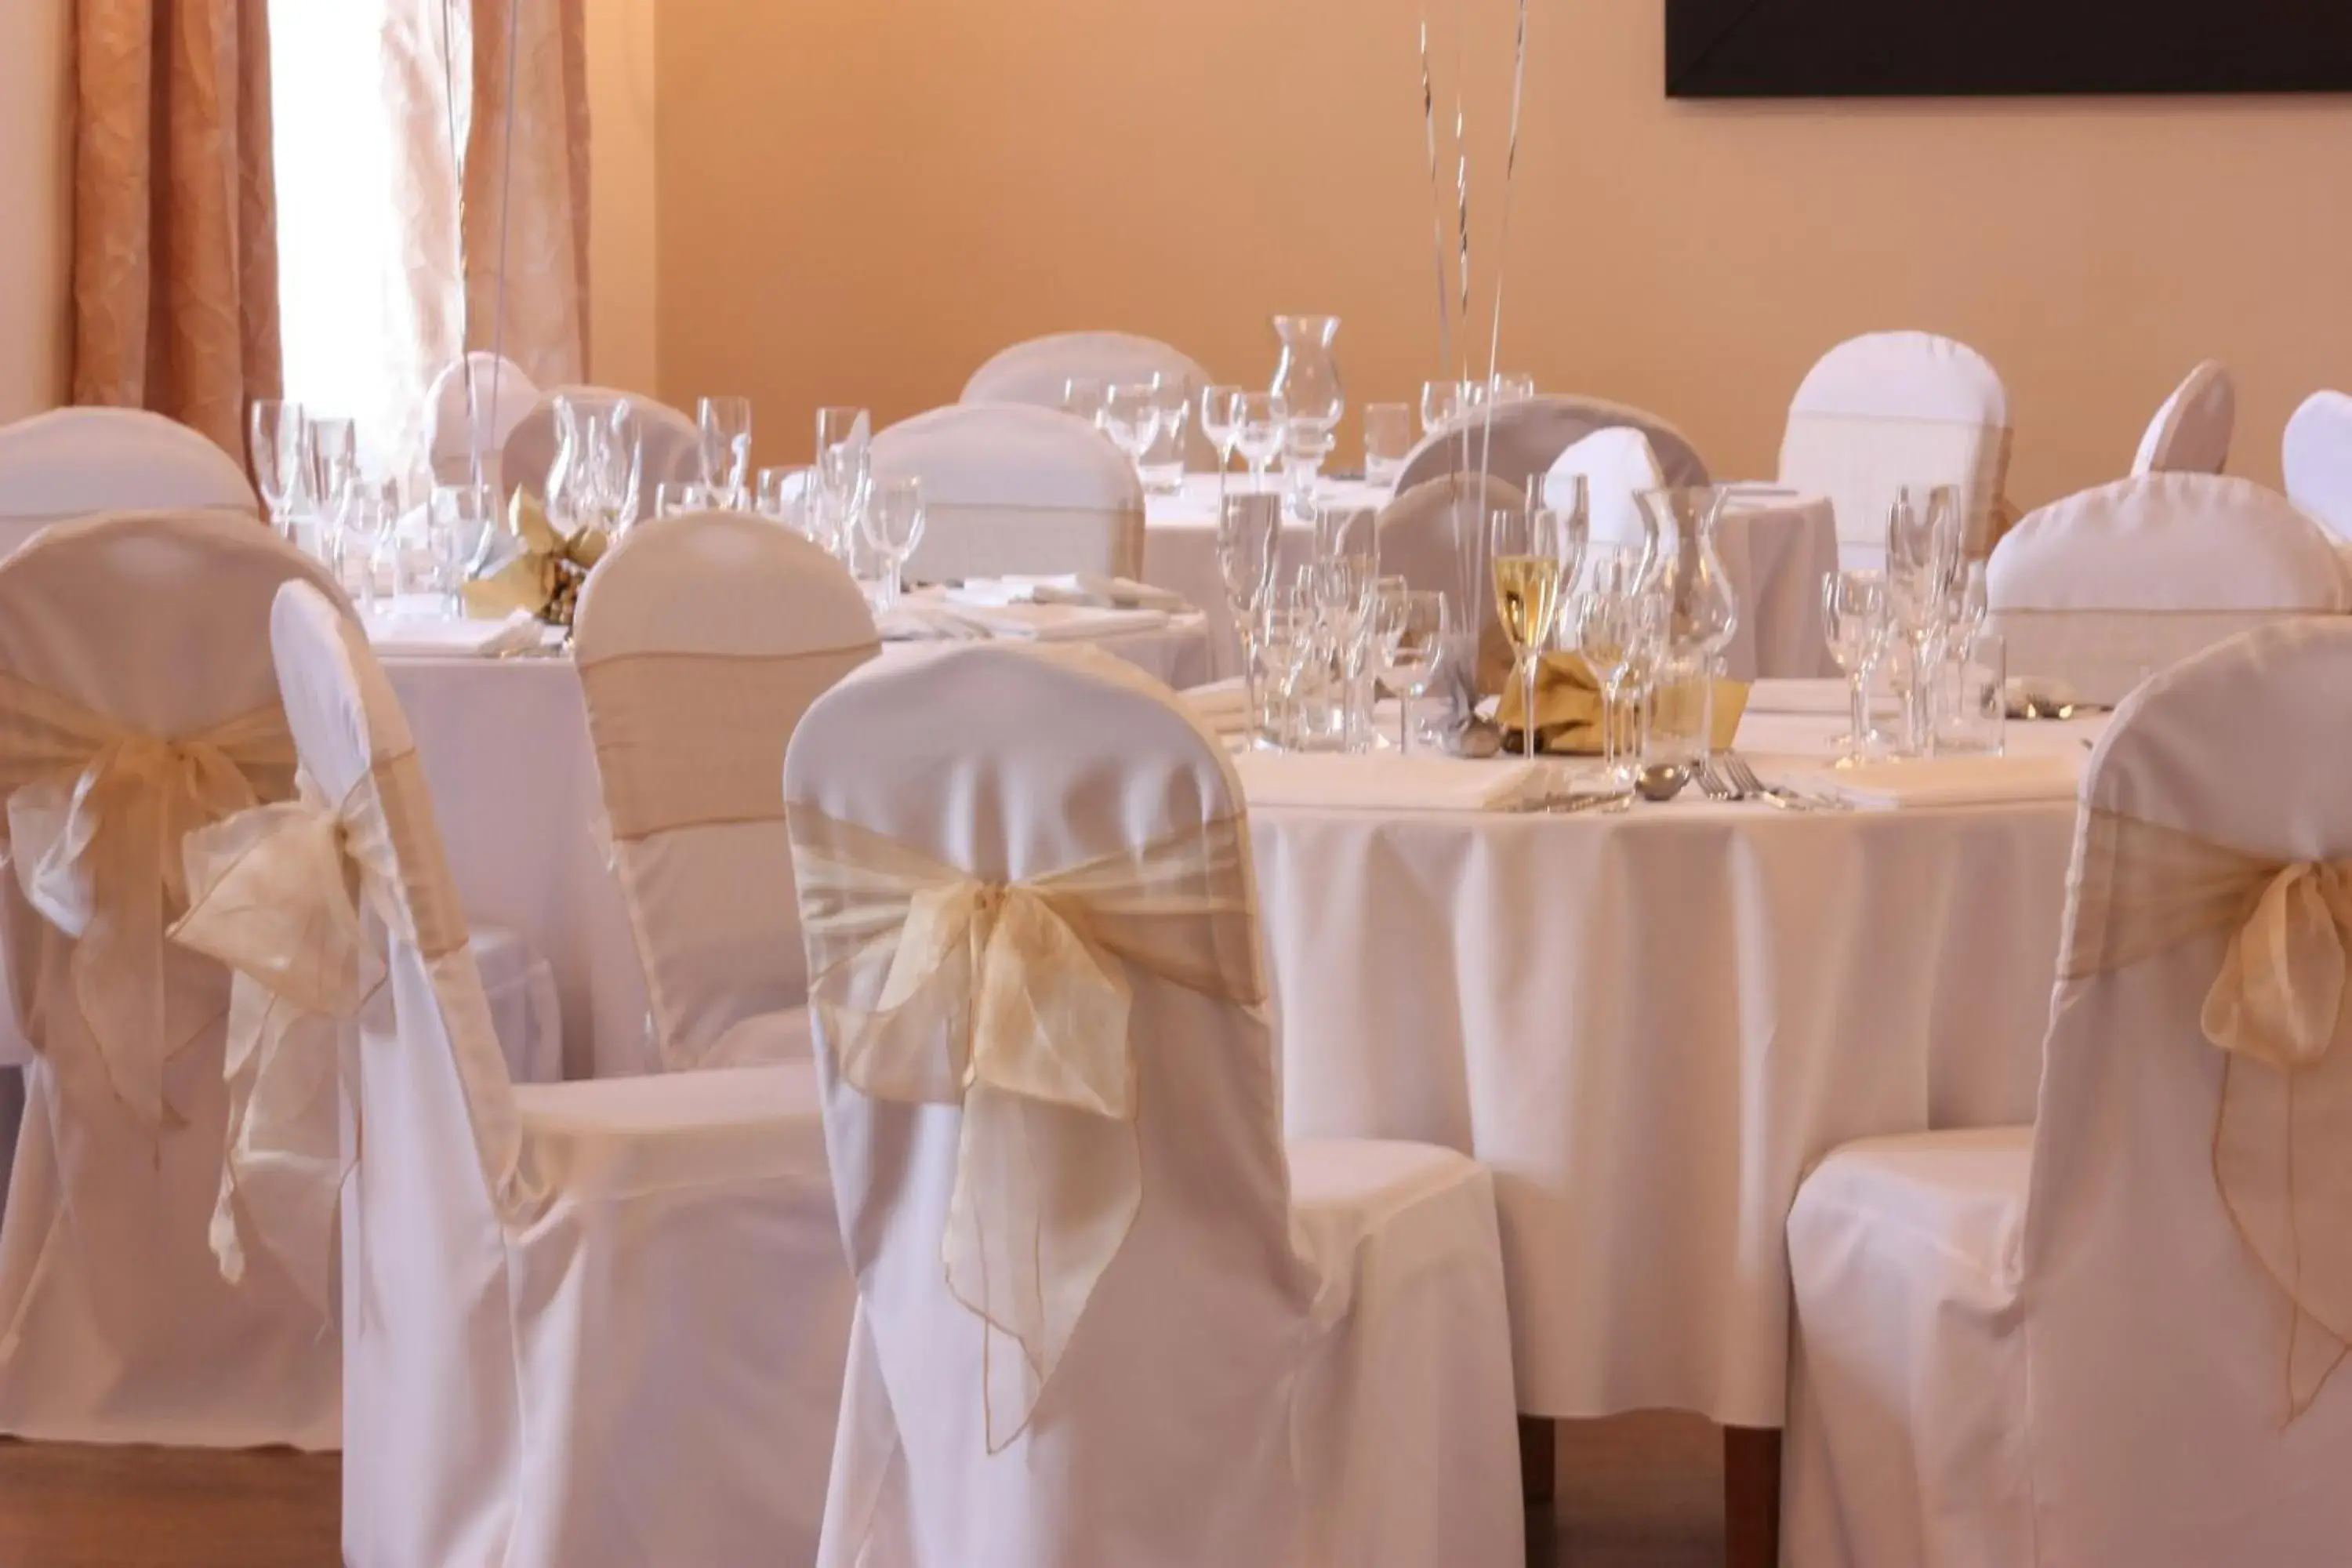 Banquet/Function facilities, Banquet Facilities in Annandale Arms Hotel